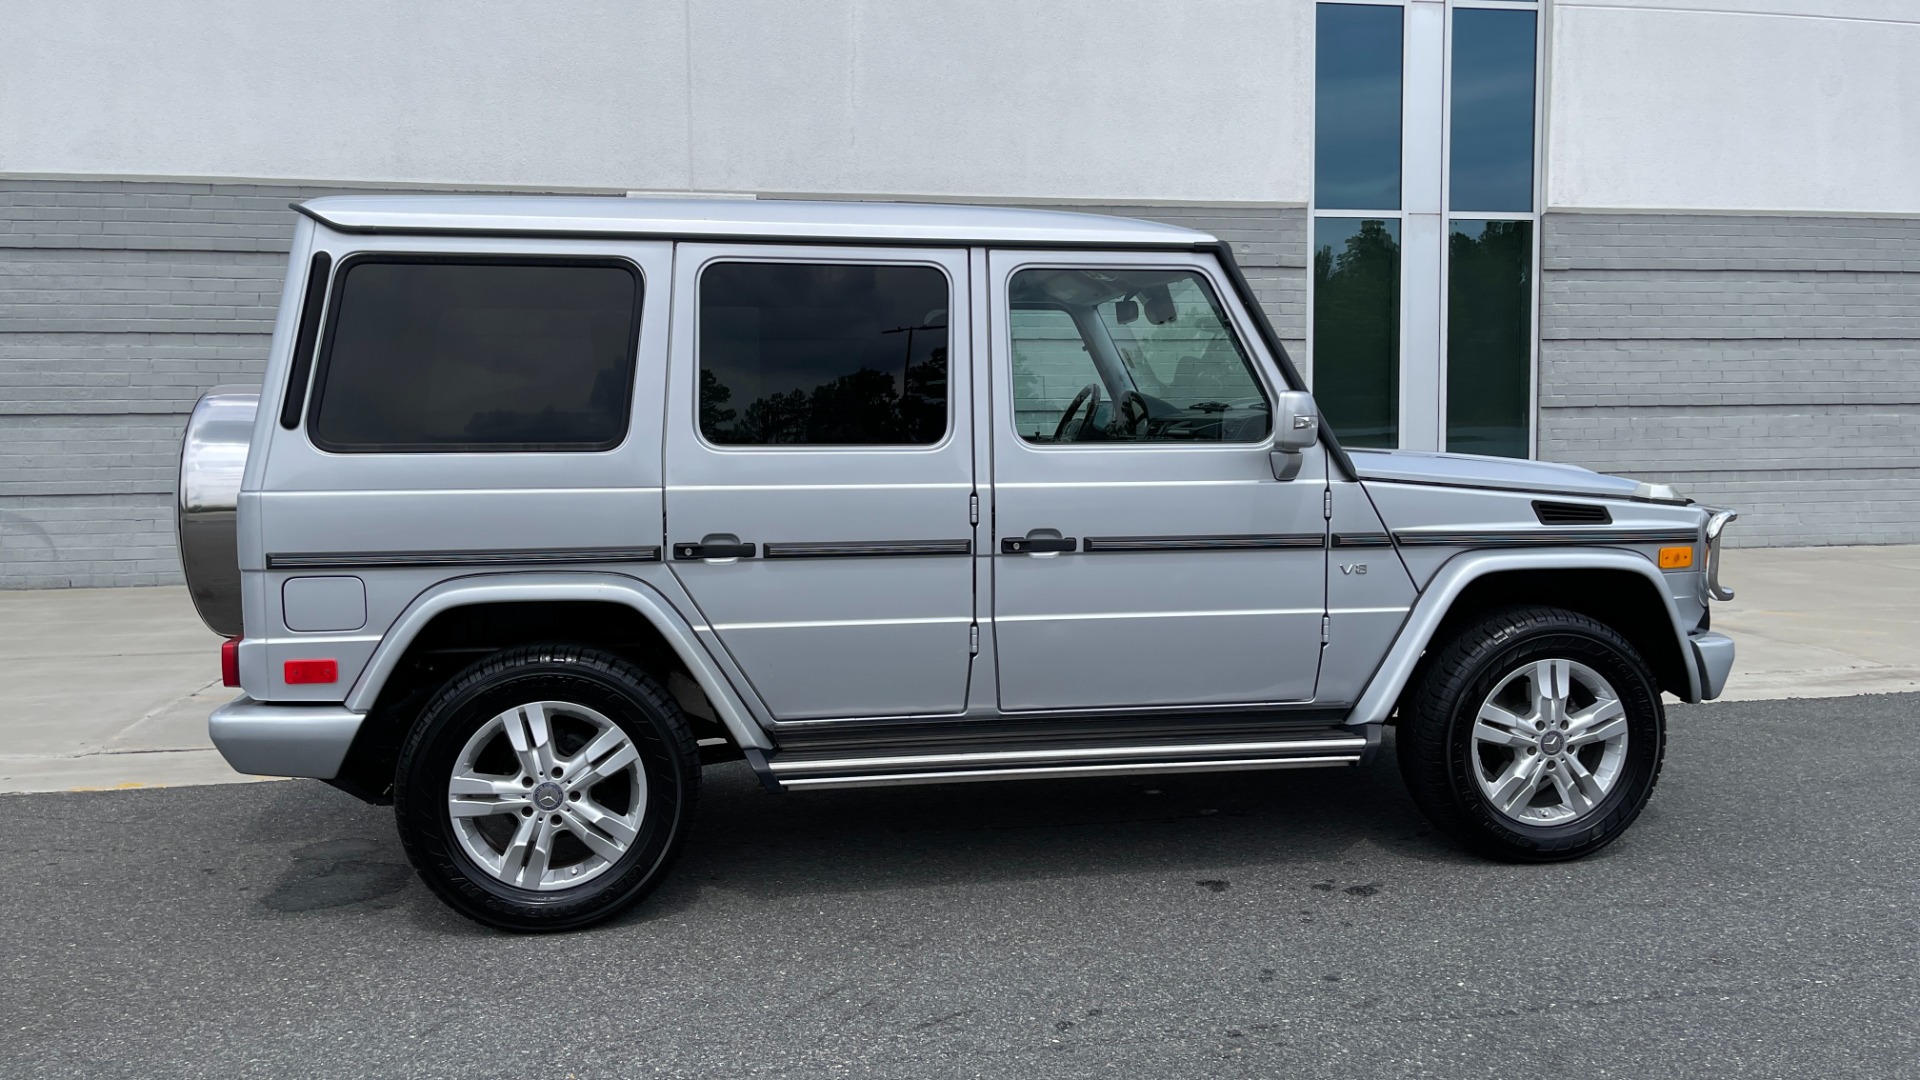 Used 2009 Mercedes-Benz G-Class 5.5L / G550 / NAV / REARVIEW / COOLED SEATS / HEATED SEATS / SUNROOF for sale $52,995 at Formula Imports in Charlotte NC 28227 8